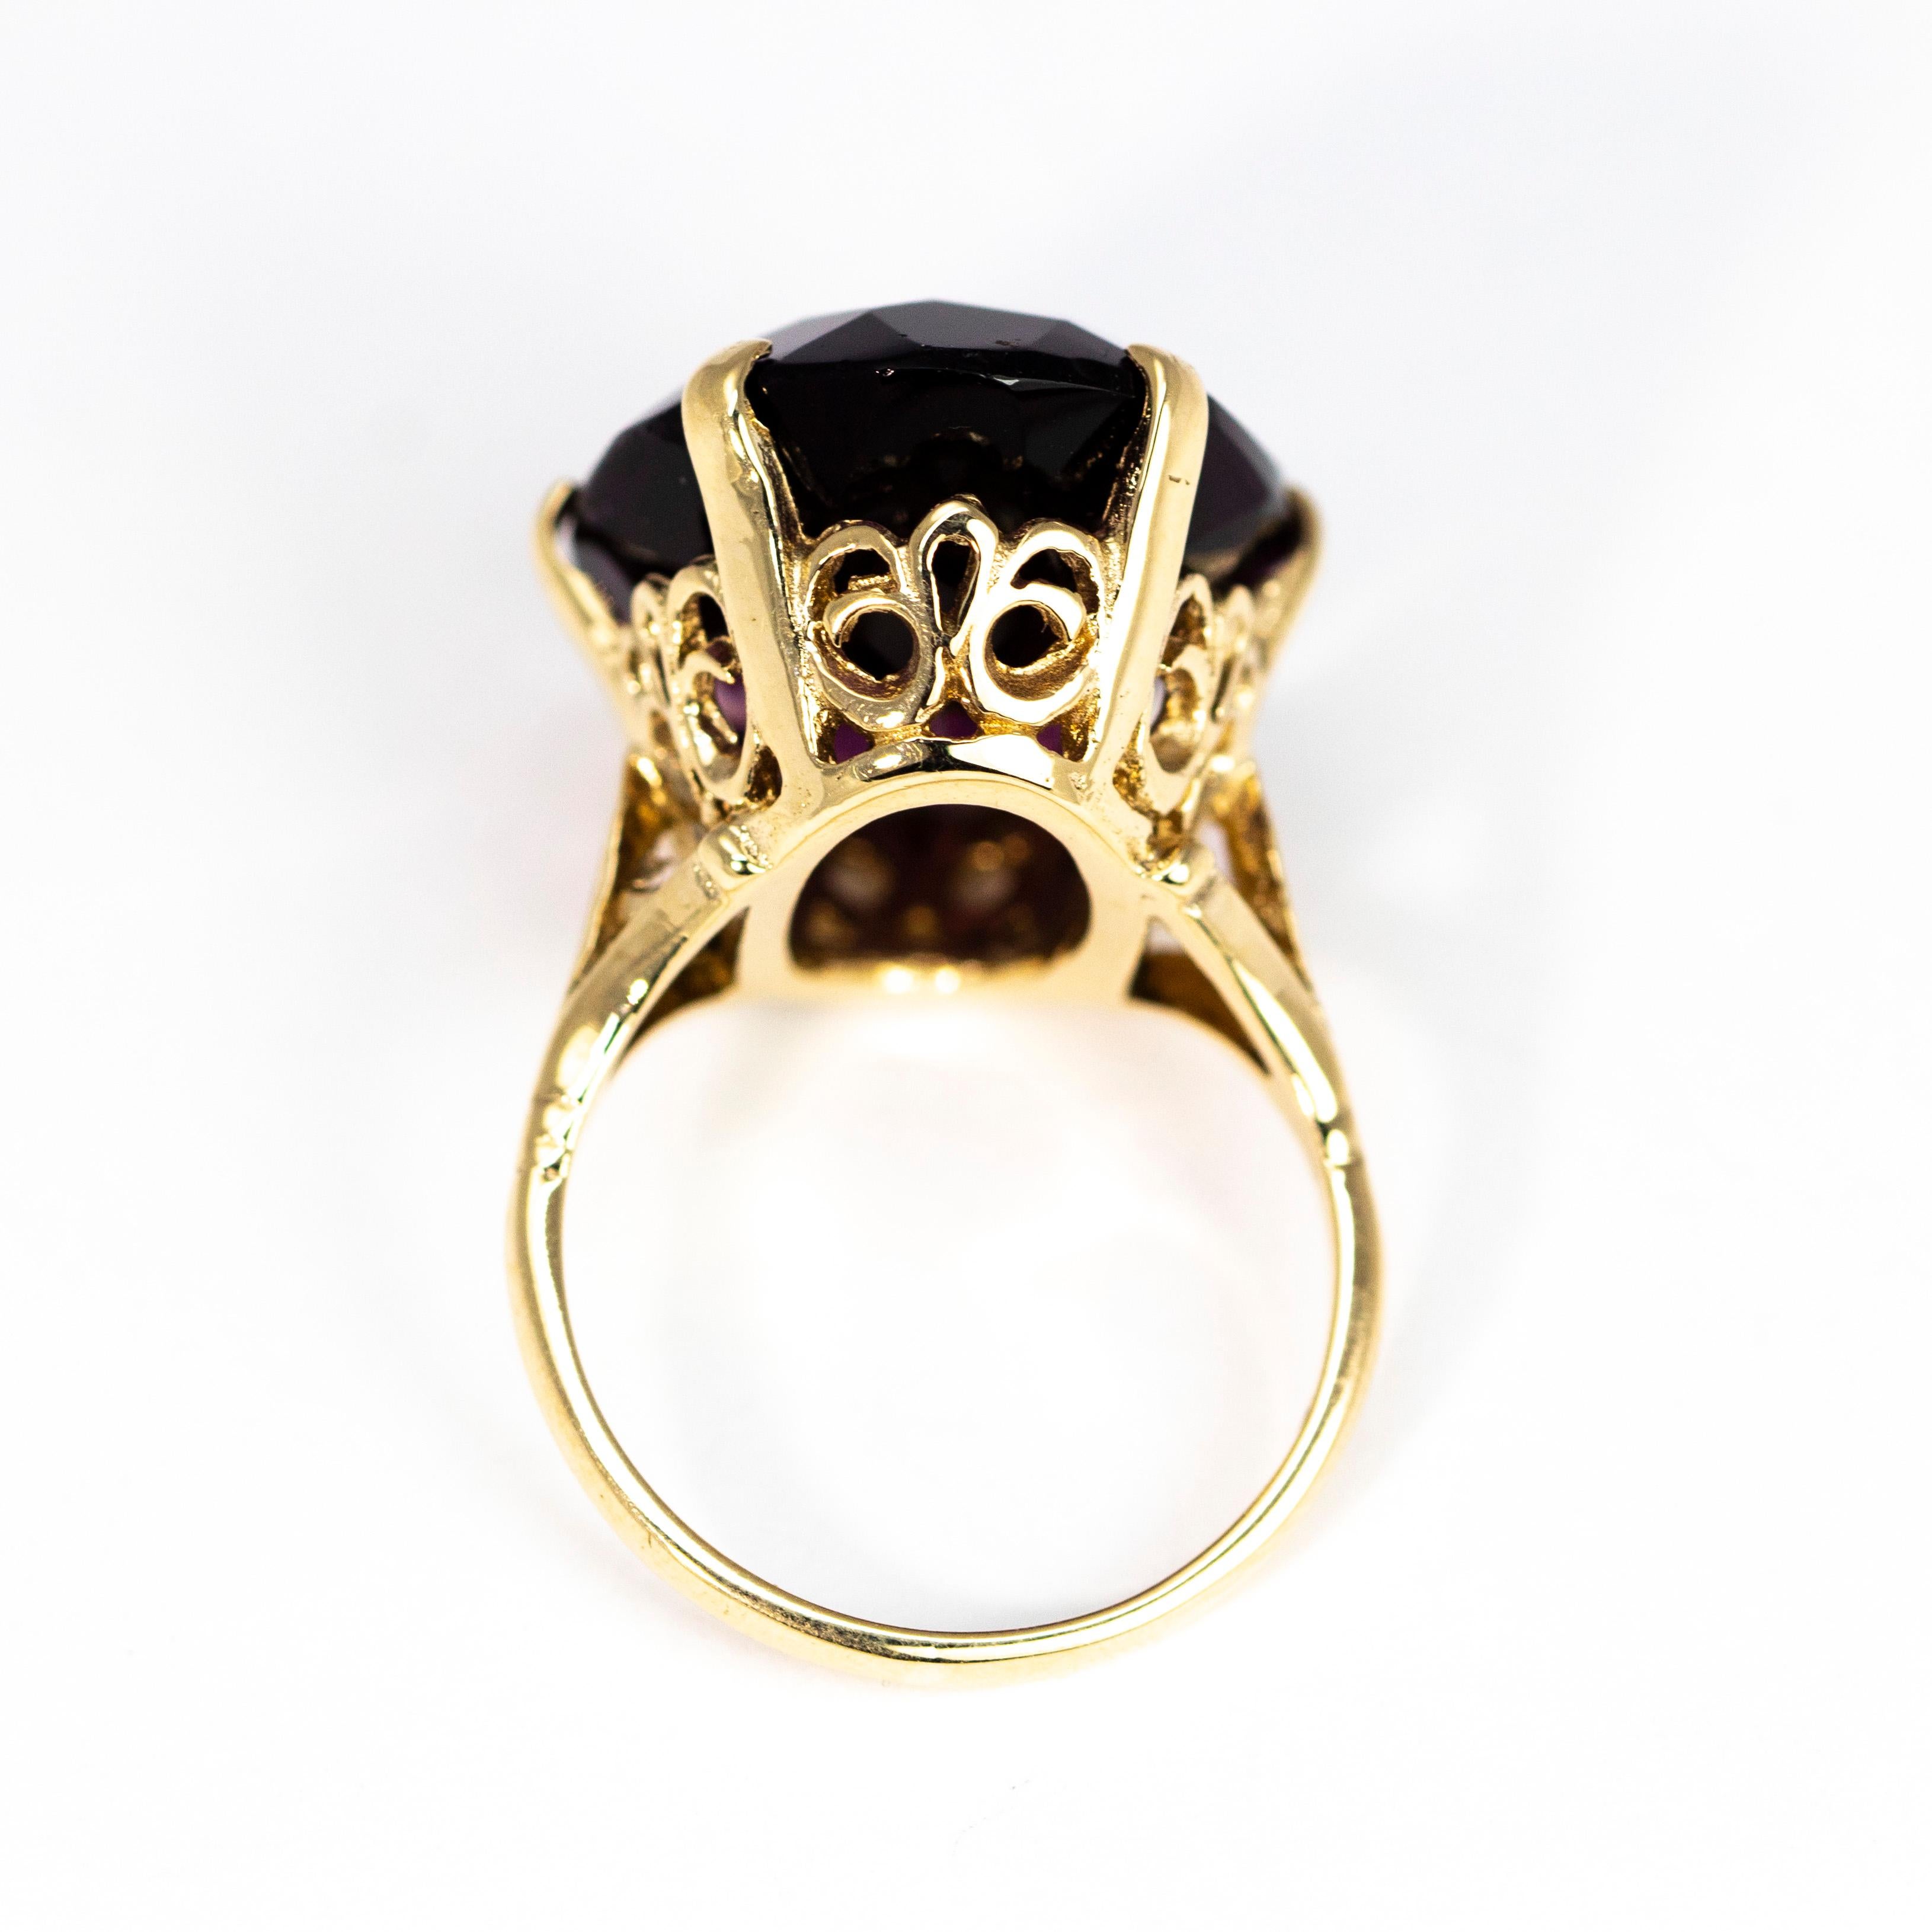 Women's Vintage Amethyst and 9 Carat Gold Cocktail Ring